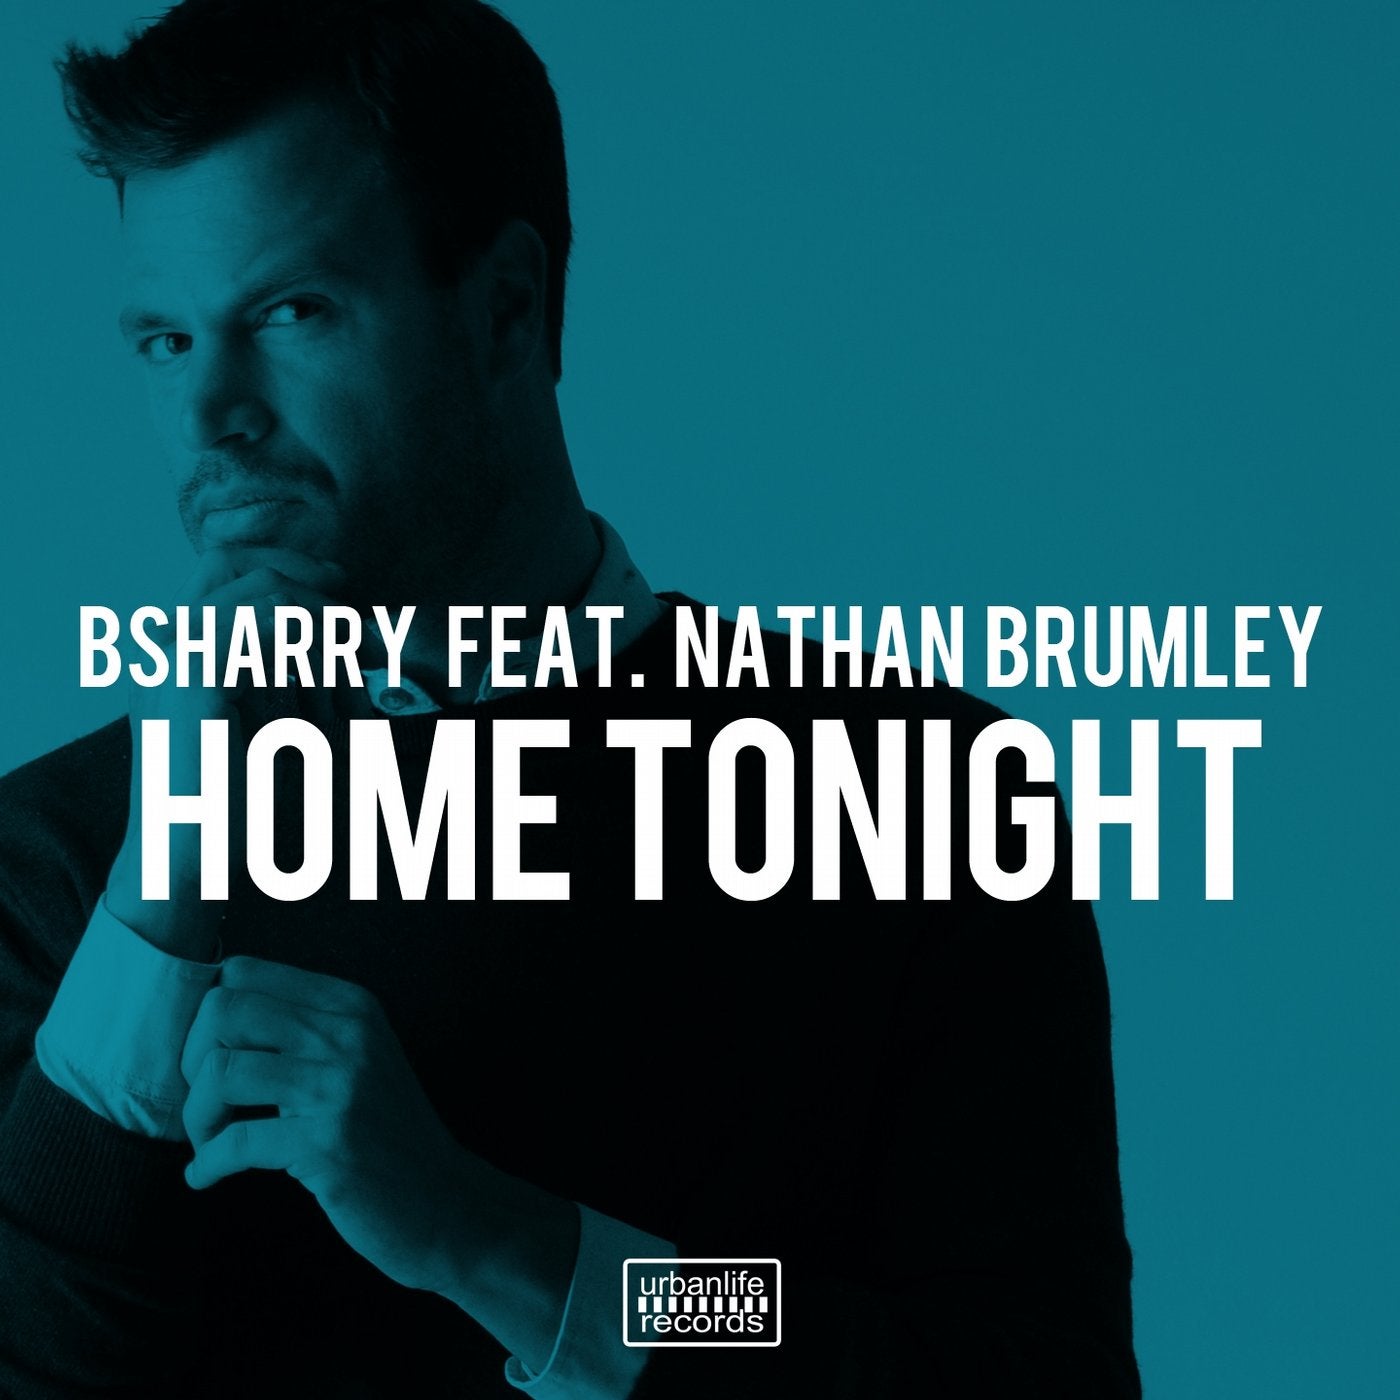 Home Tonight (feat. Nathan Brumley)